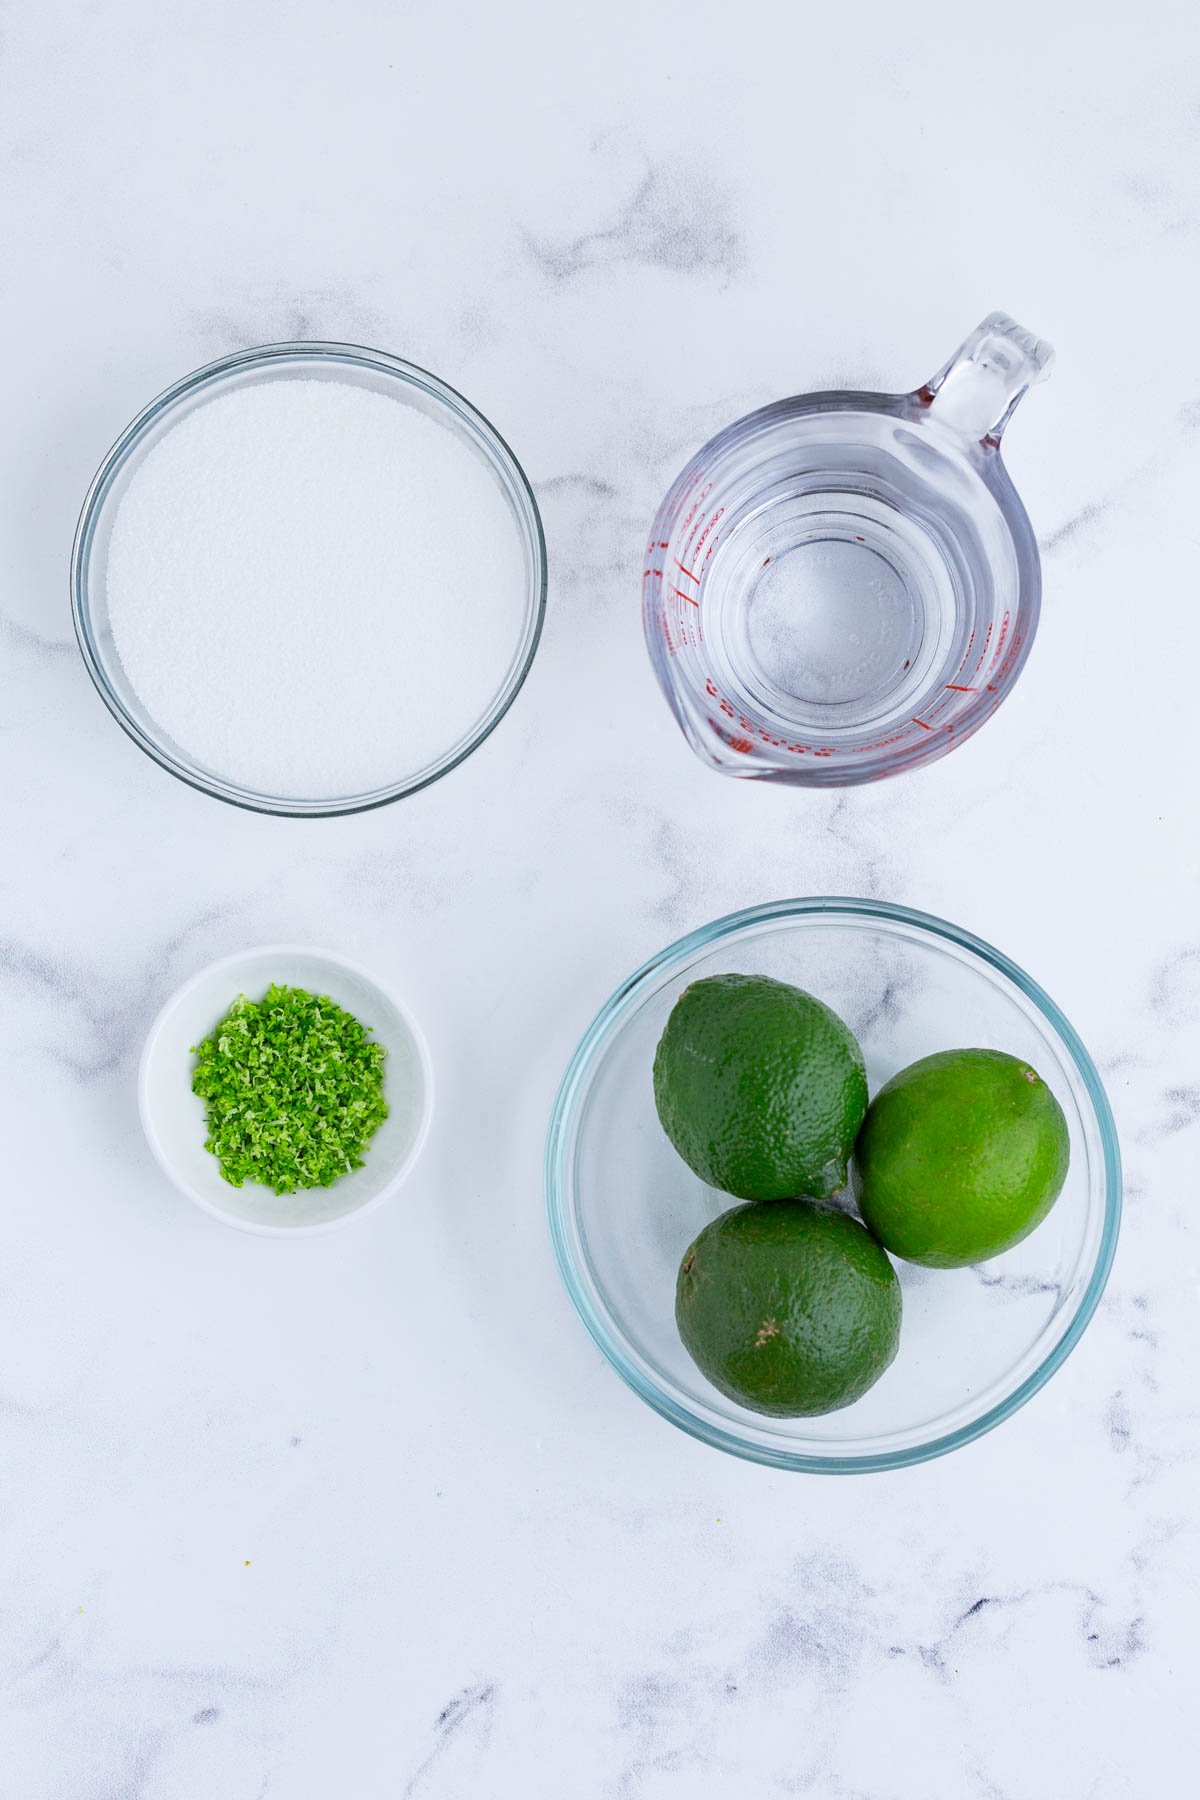 Limes, water, and sugar are the ingredients for this recipe.